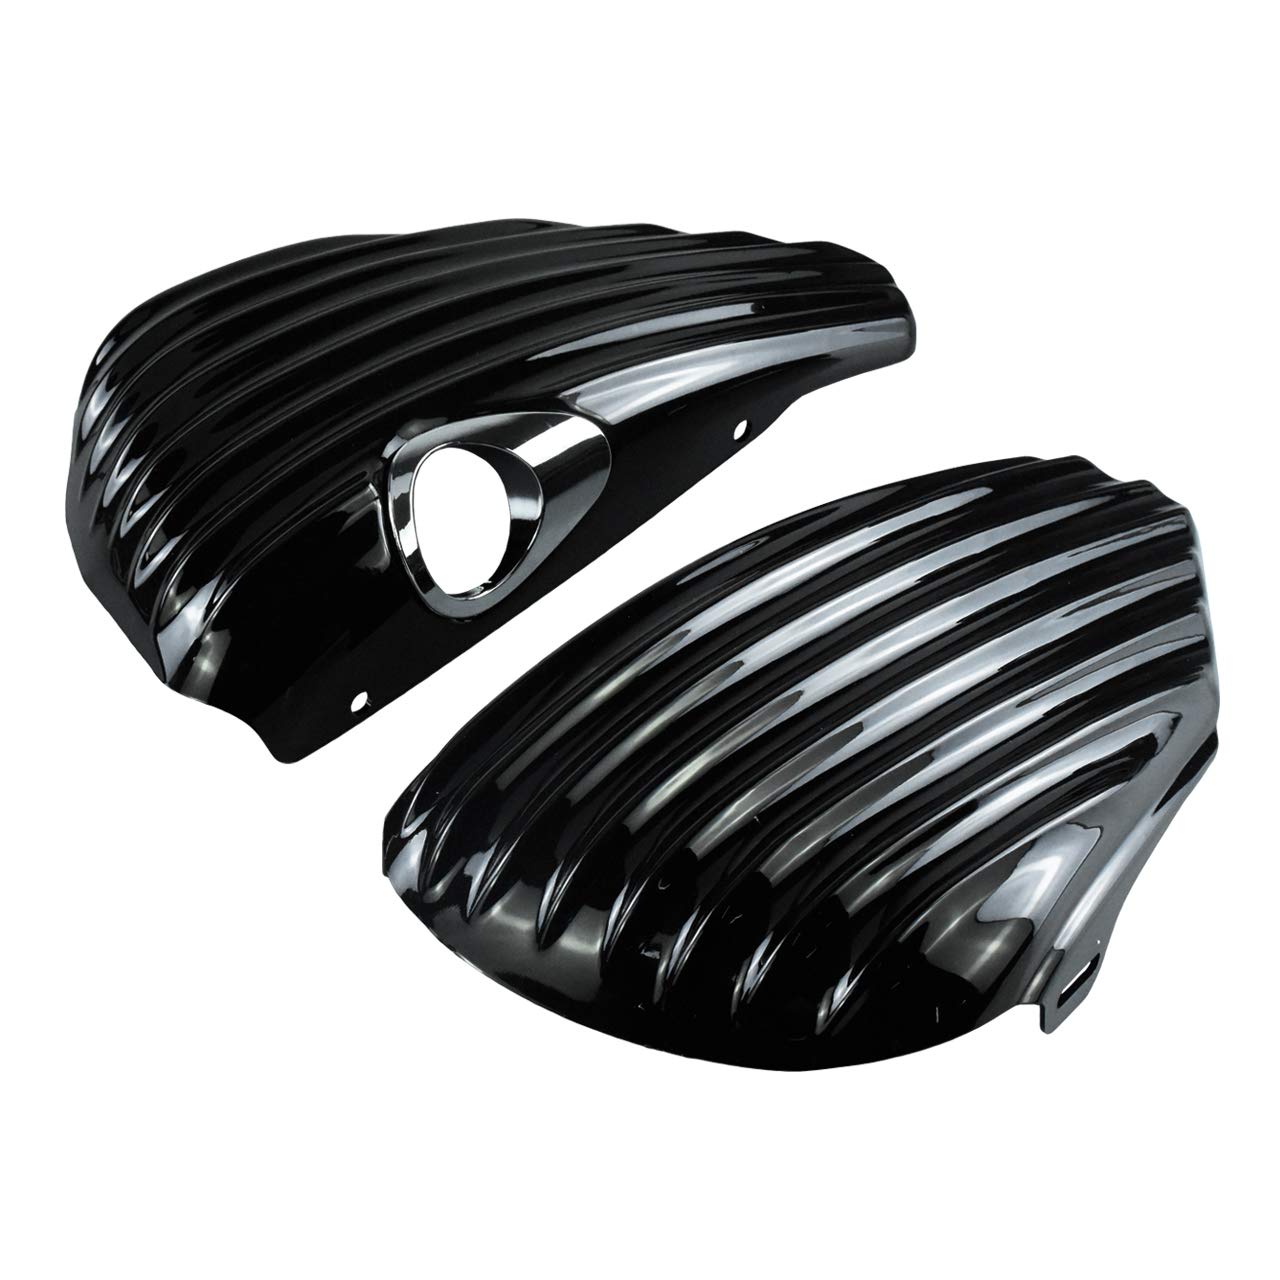 HDBUBALUS Motorcycle Battery Side Cover Guard Fit for Harley Sportster XL48 883 1200 2014-2020 Left and Right Side von HDBUBALUS